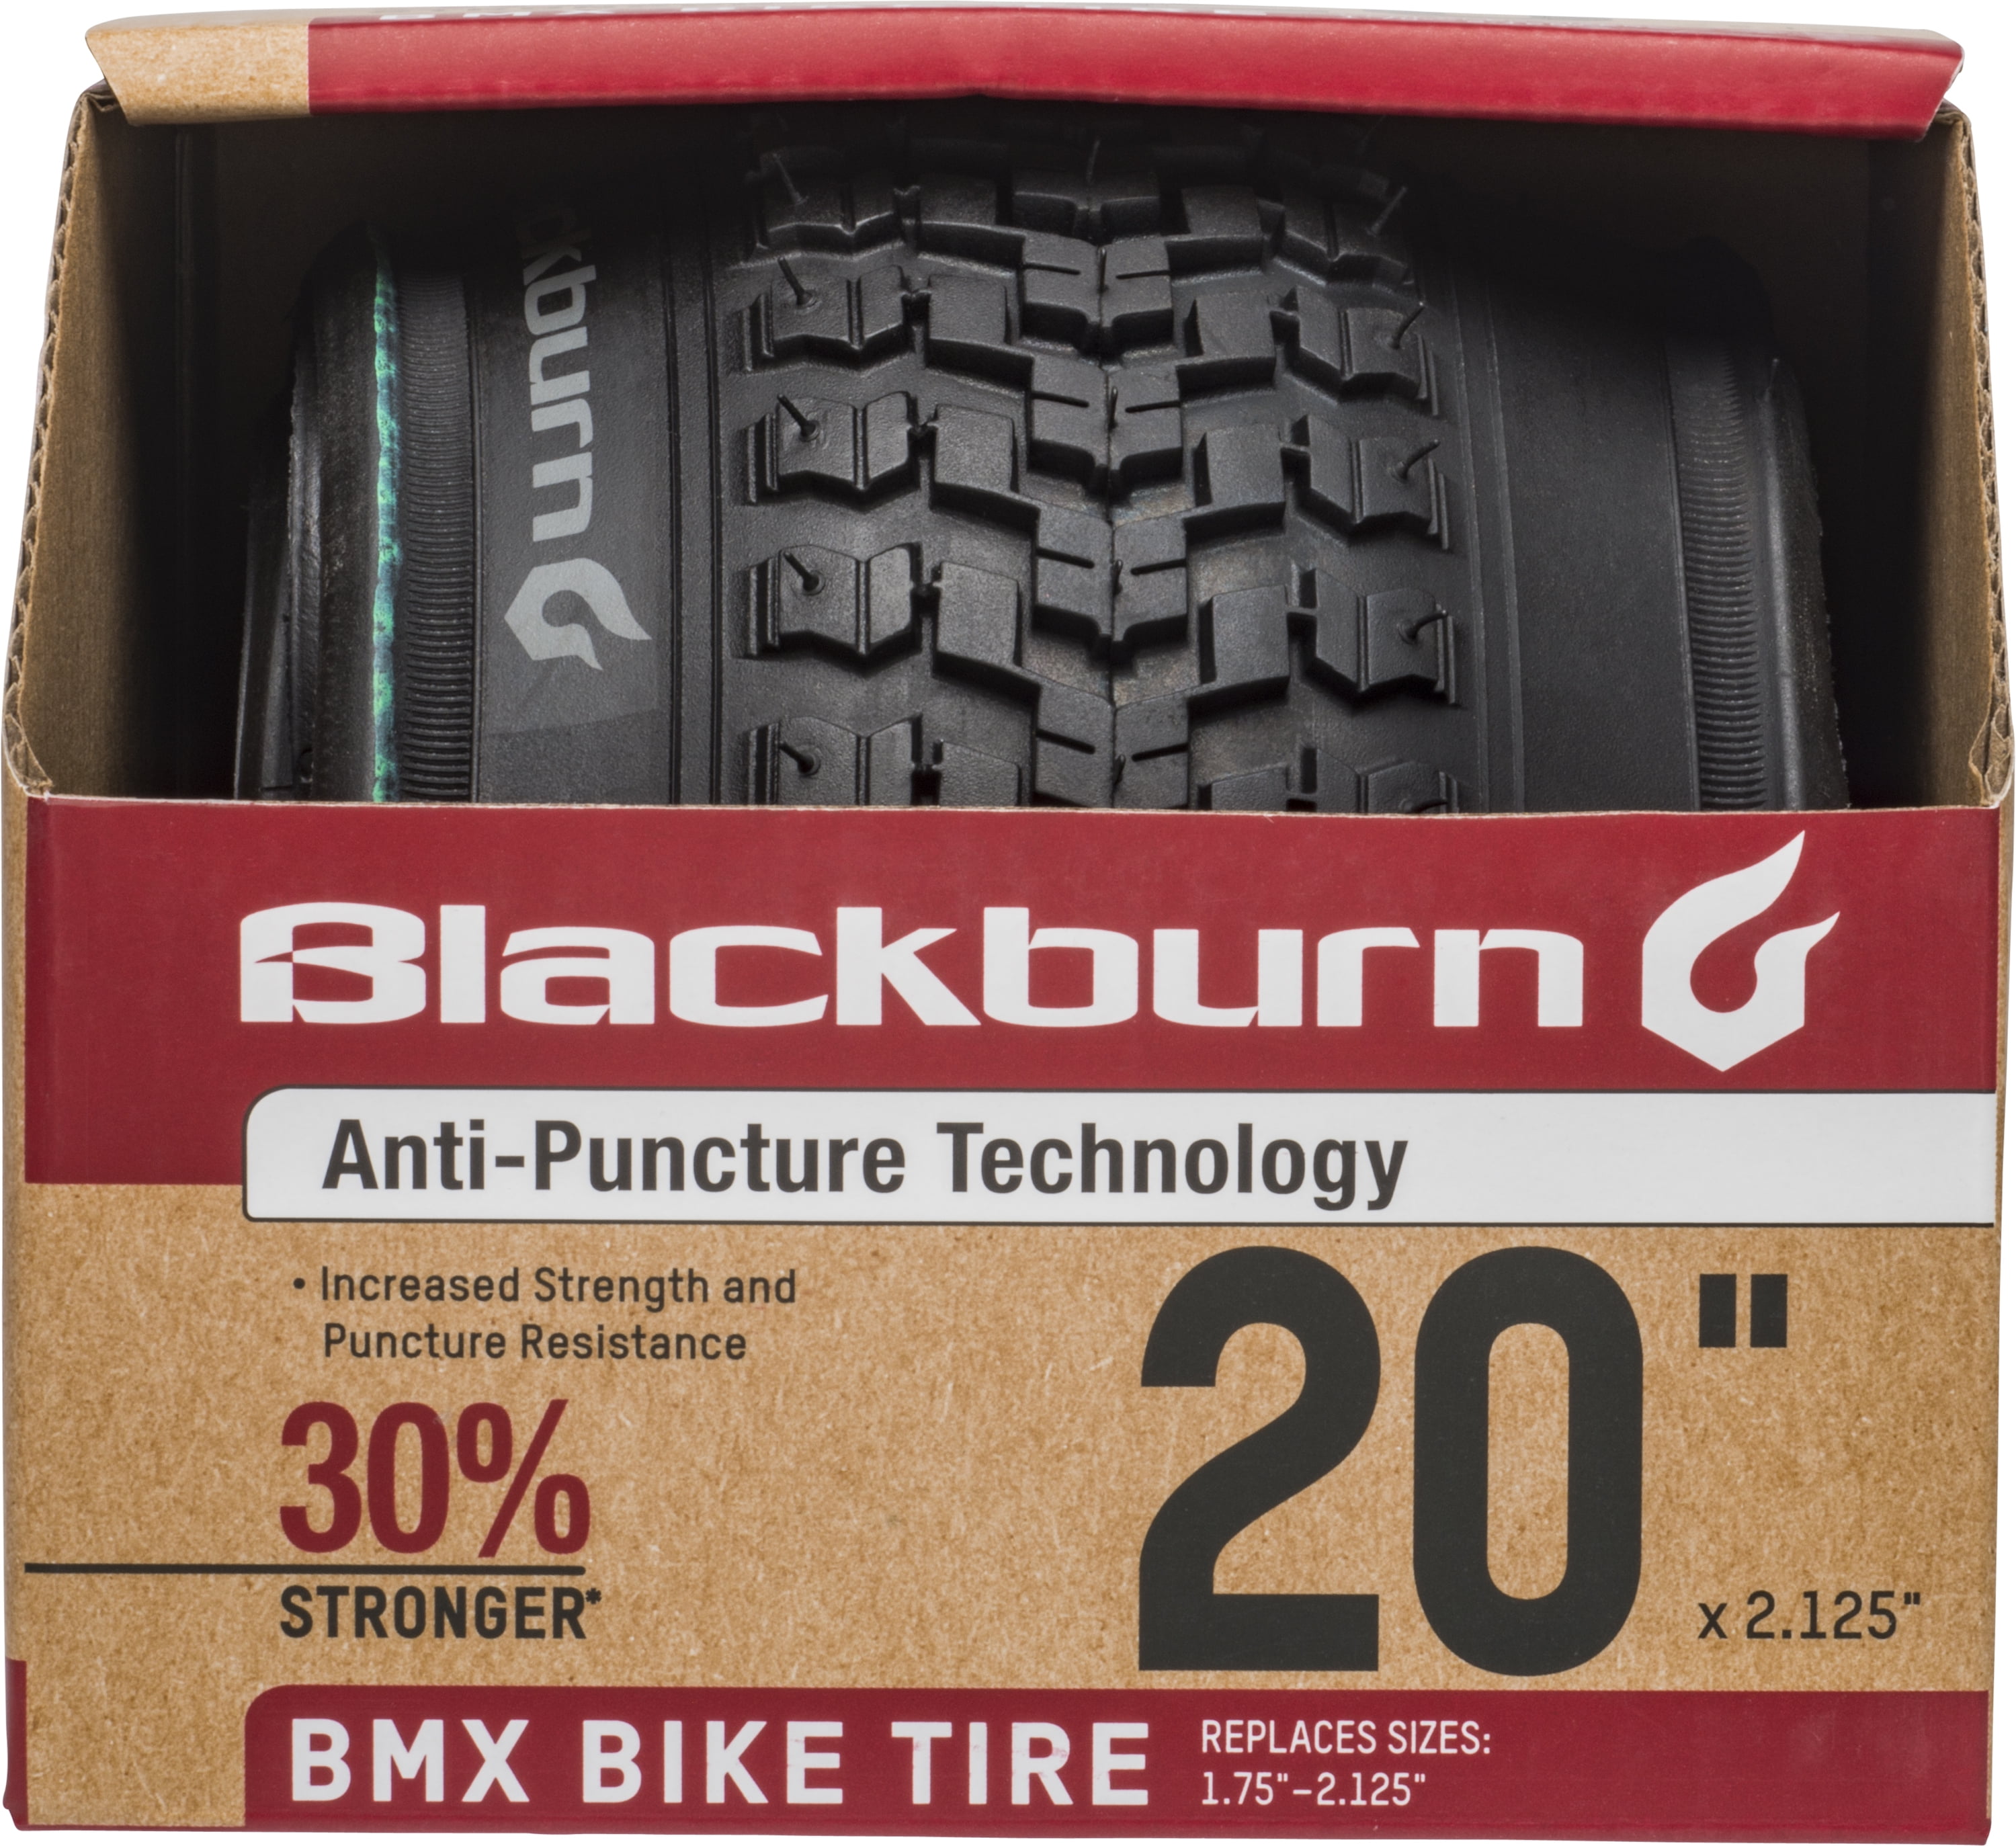 Details about   Bell Freestyle BMX Bike Tire 20" x 2.0" Black Air Guard Anti-Puncture New in Box 